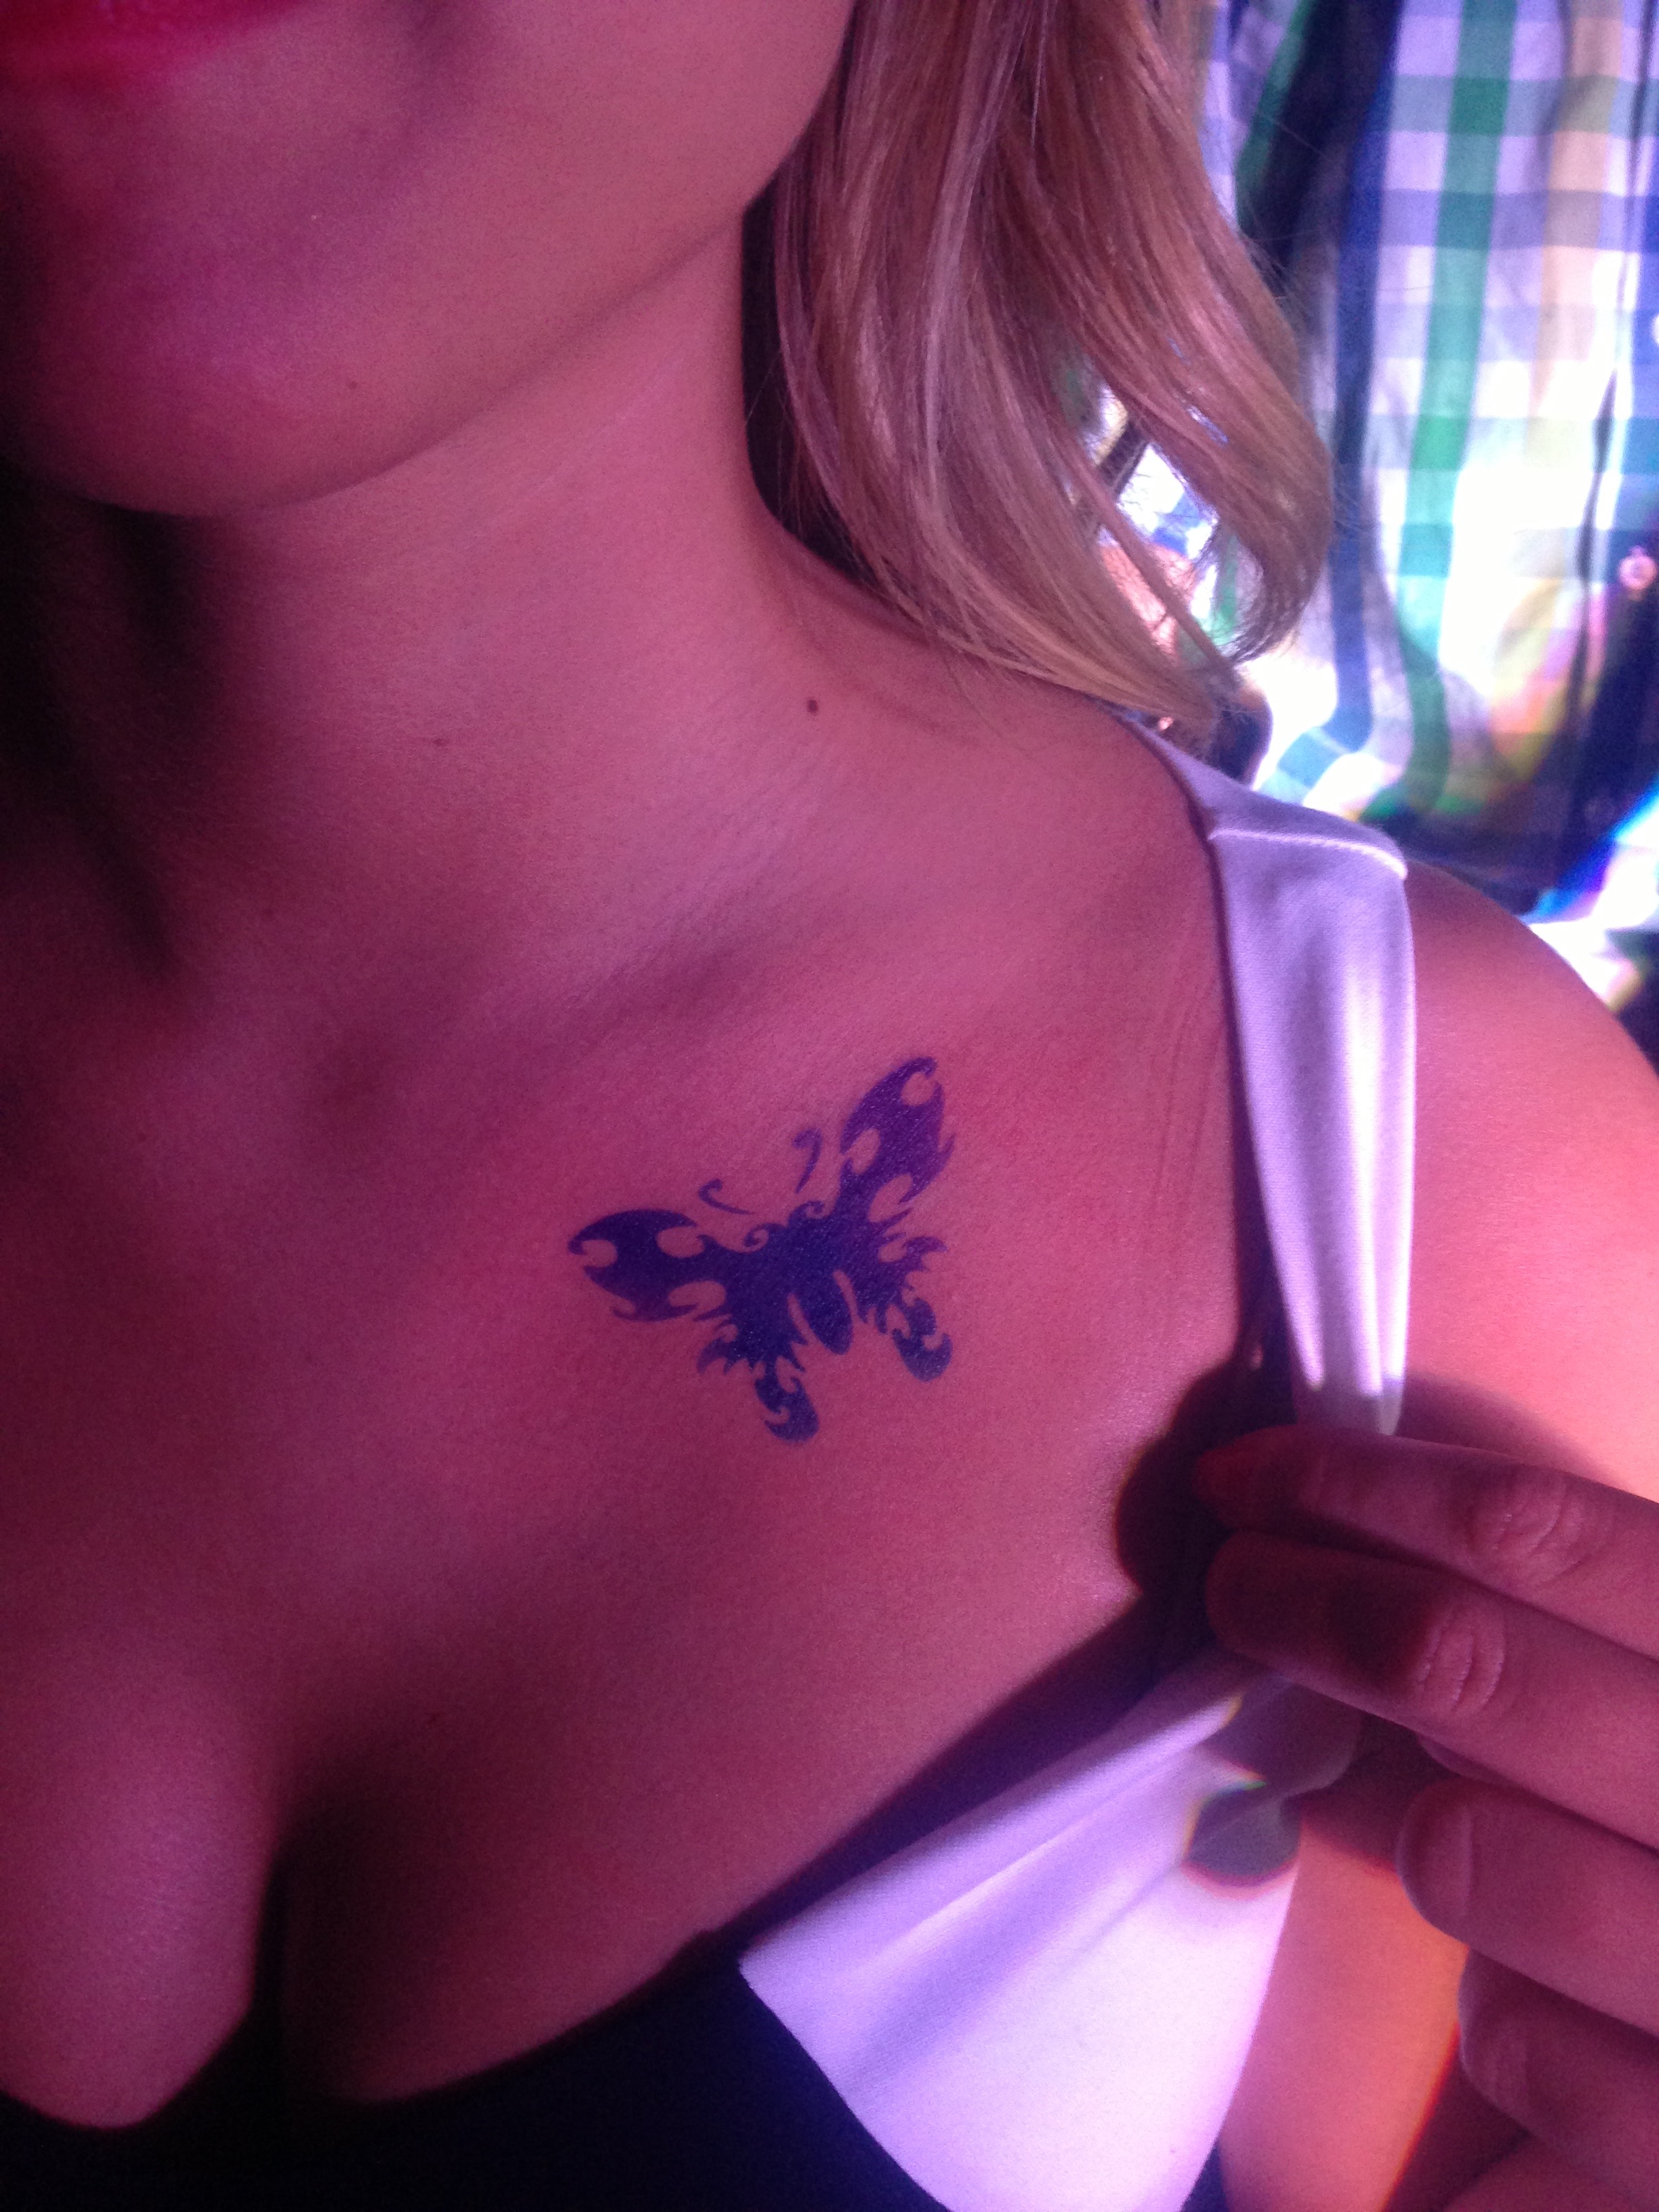 Gallery - Airbrush Tattoos chest butterfly.jpg